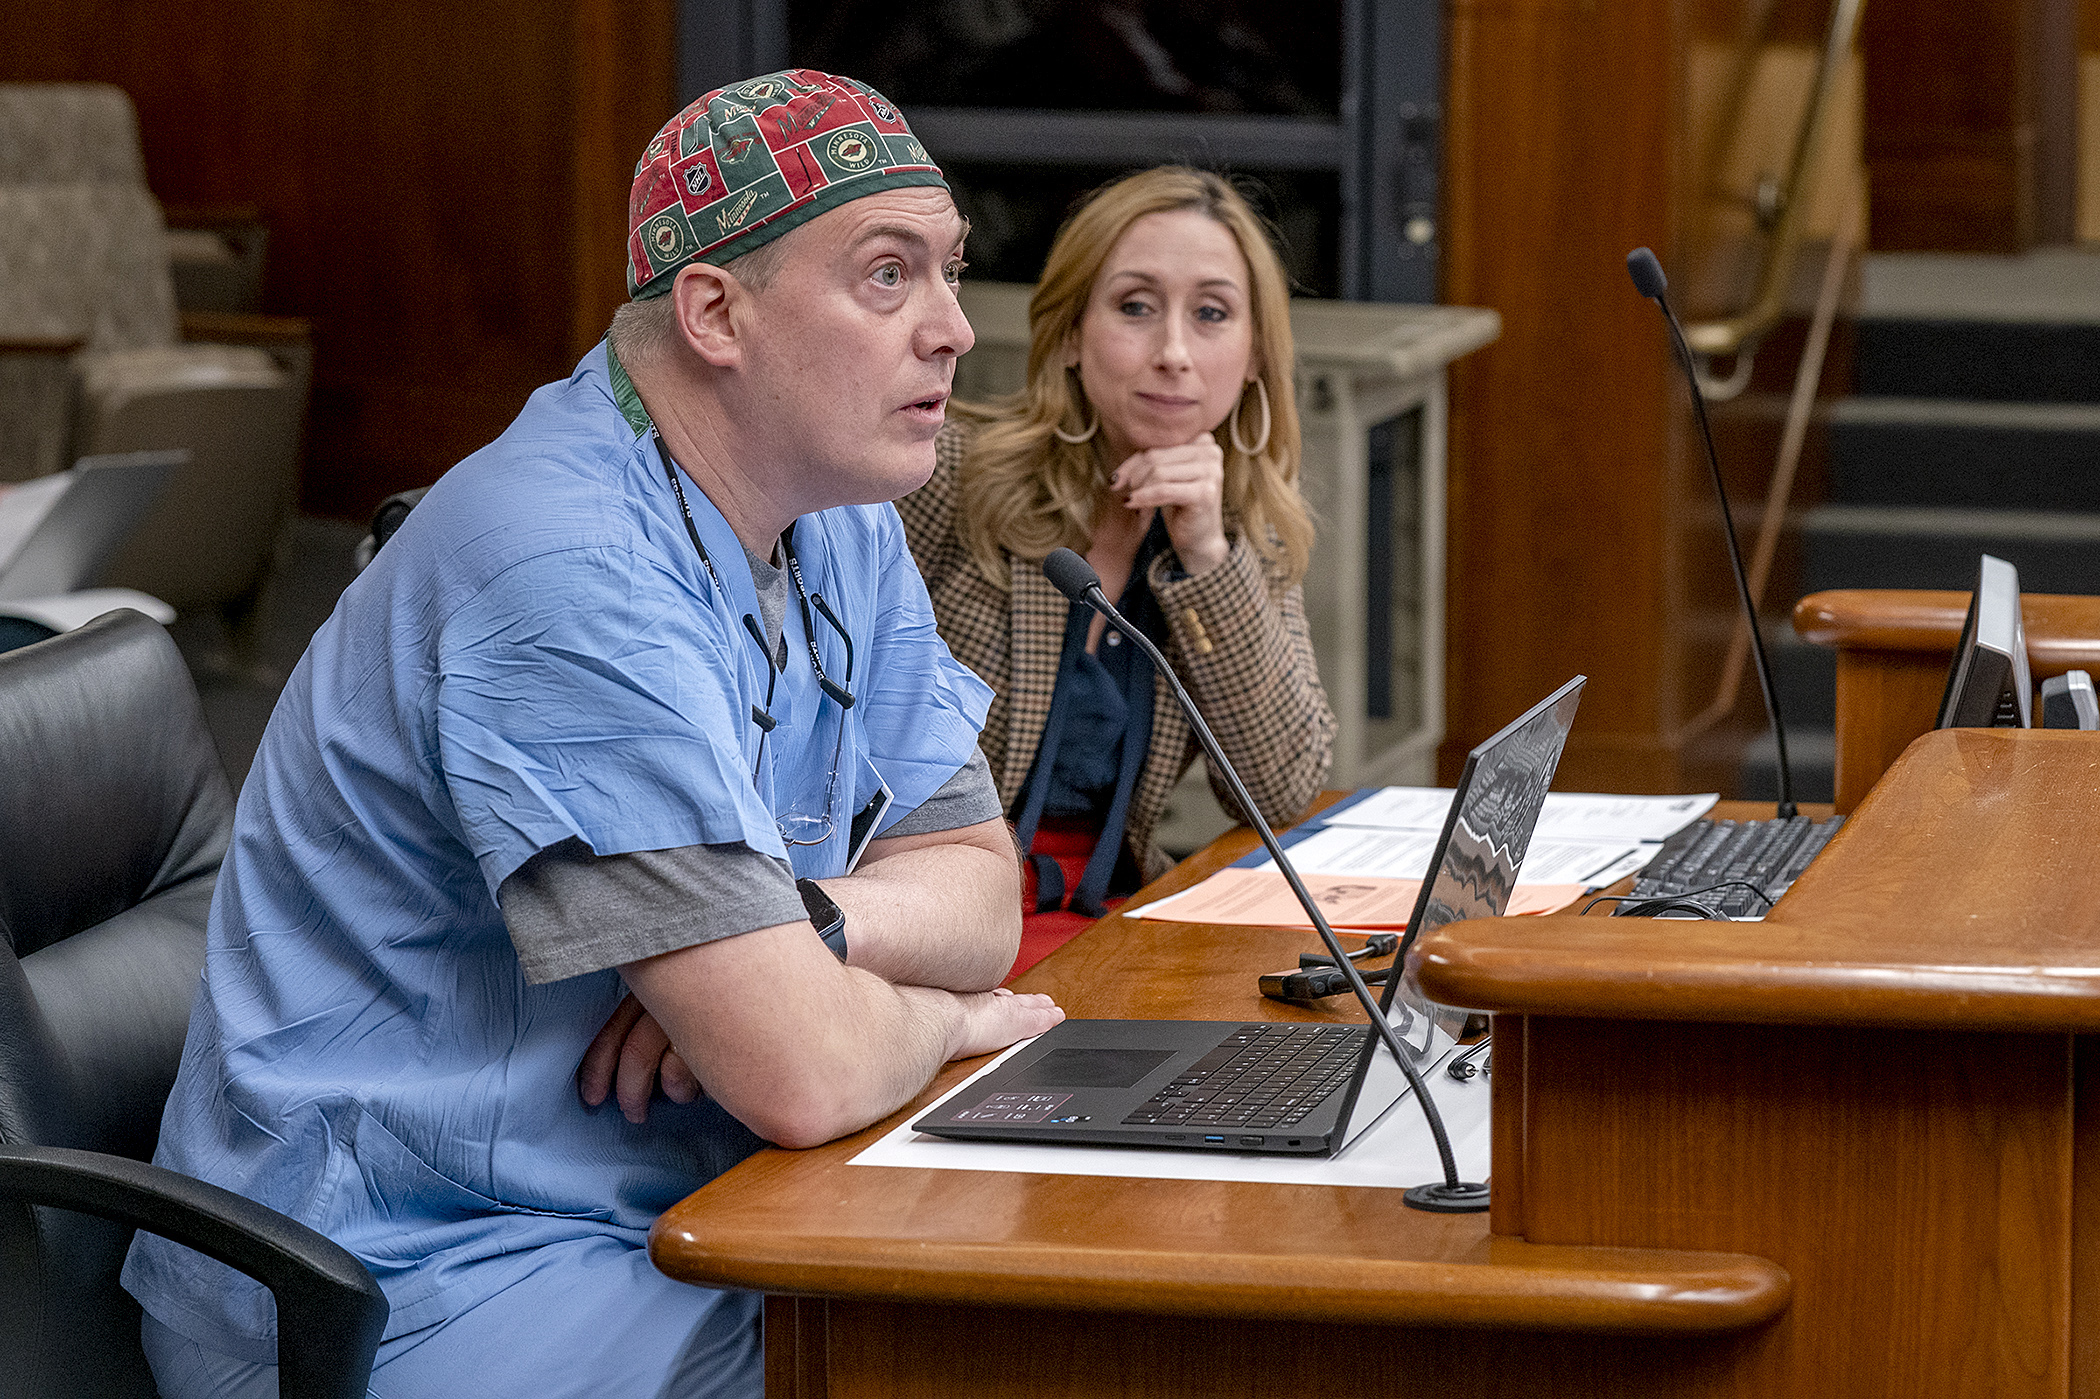 John Zender, a perioperative registered nurse, testifies Feb. 29 about the dangers of surgical smoke. Rep. Kaela Berg sponsors HF4011 to require use of smoke evacuation systems during procedures that produce surgical smoke. (Photo by Michele Jokinen)